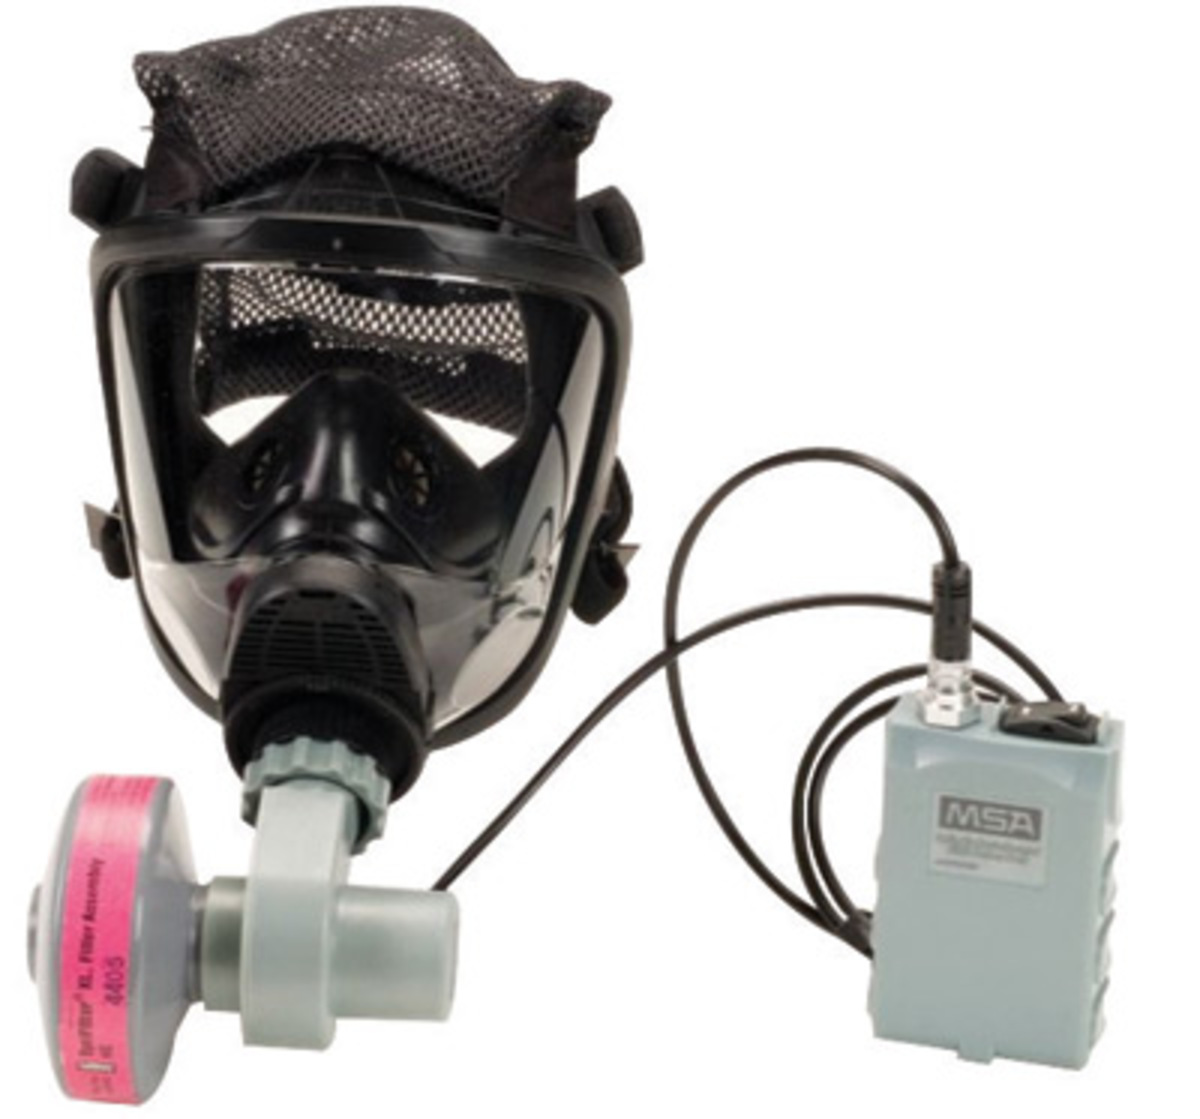 MSA Large OptimAir® Series Full Mask Air Purifying Respirator (Availability restrictions apply.)